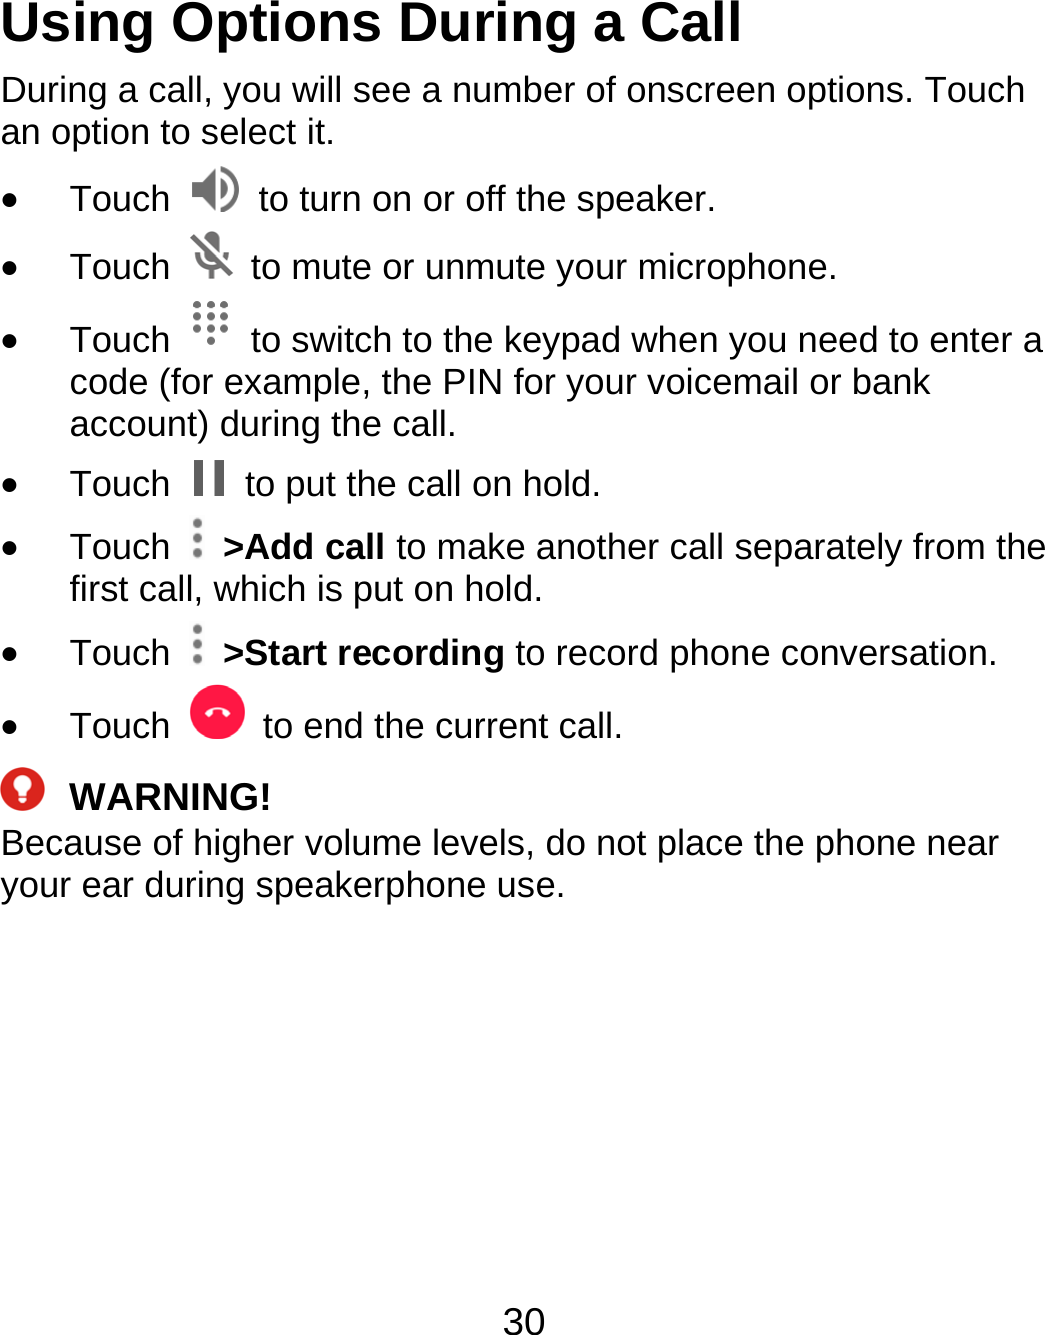 30 Using Options During a Call During a call, you will see a number of onscreen options. Touch an option to select it.  Touch    to turn on or off the speaker.  Touch    to mute or unmute your microphone.  Touch    to switch to the keypad when you need to enter a code (for example, the PIN for your voicemail or bank account) during the call.  Touch    to put the call on hold.  Touch   &gt;Add call to make another call separately from the first call, which is put on hold.  Touch   &gt;Start recording to record phone conversation.  Touch    to end the current call.  WARNING! Because of higher volume levels, do not place the phone near your ear during speakerphone use. 